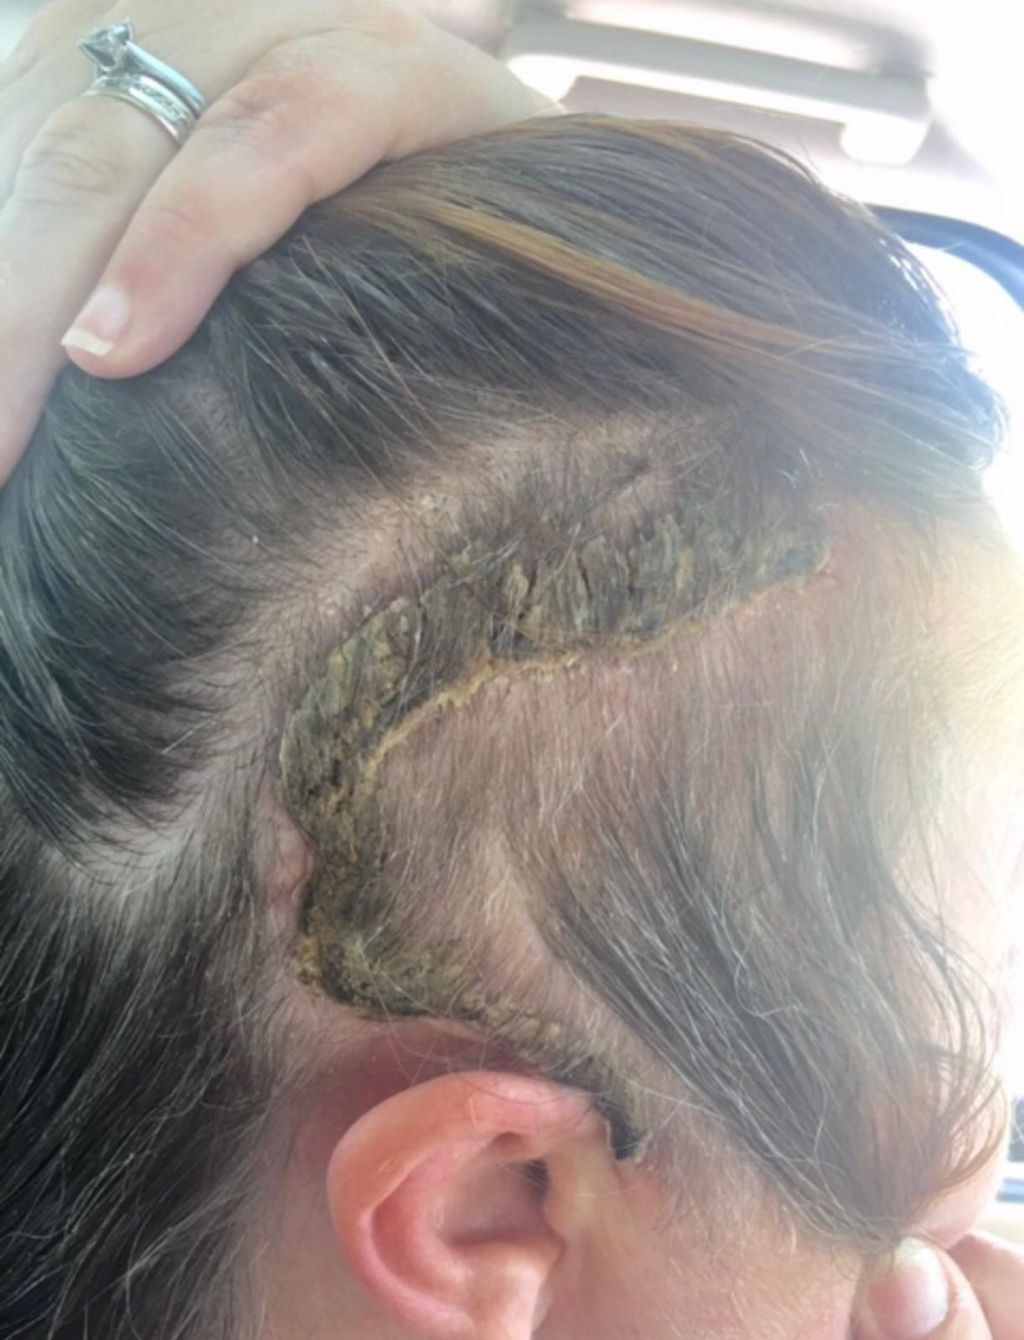 The side of Alex's head above her ear has a C-shaped scar from surgery.